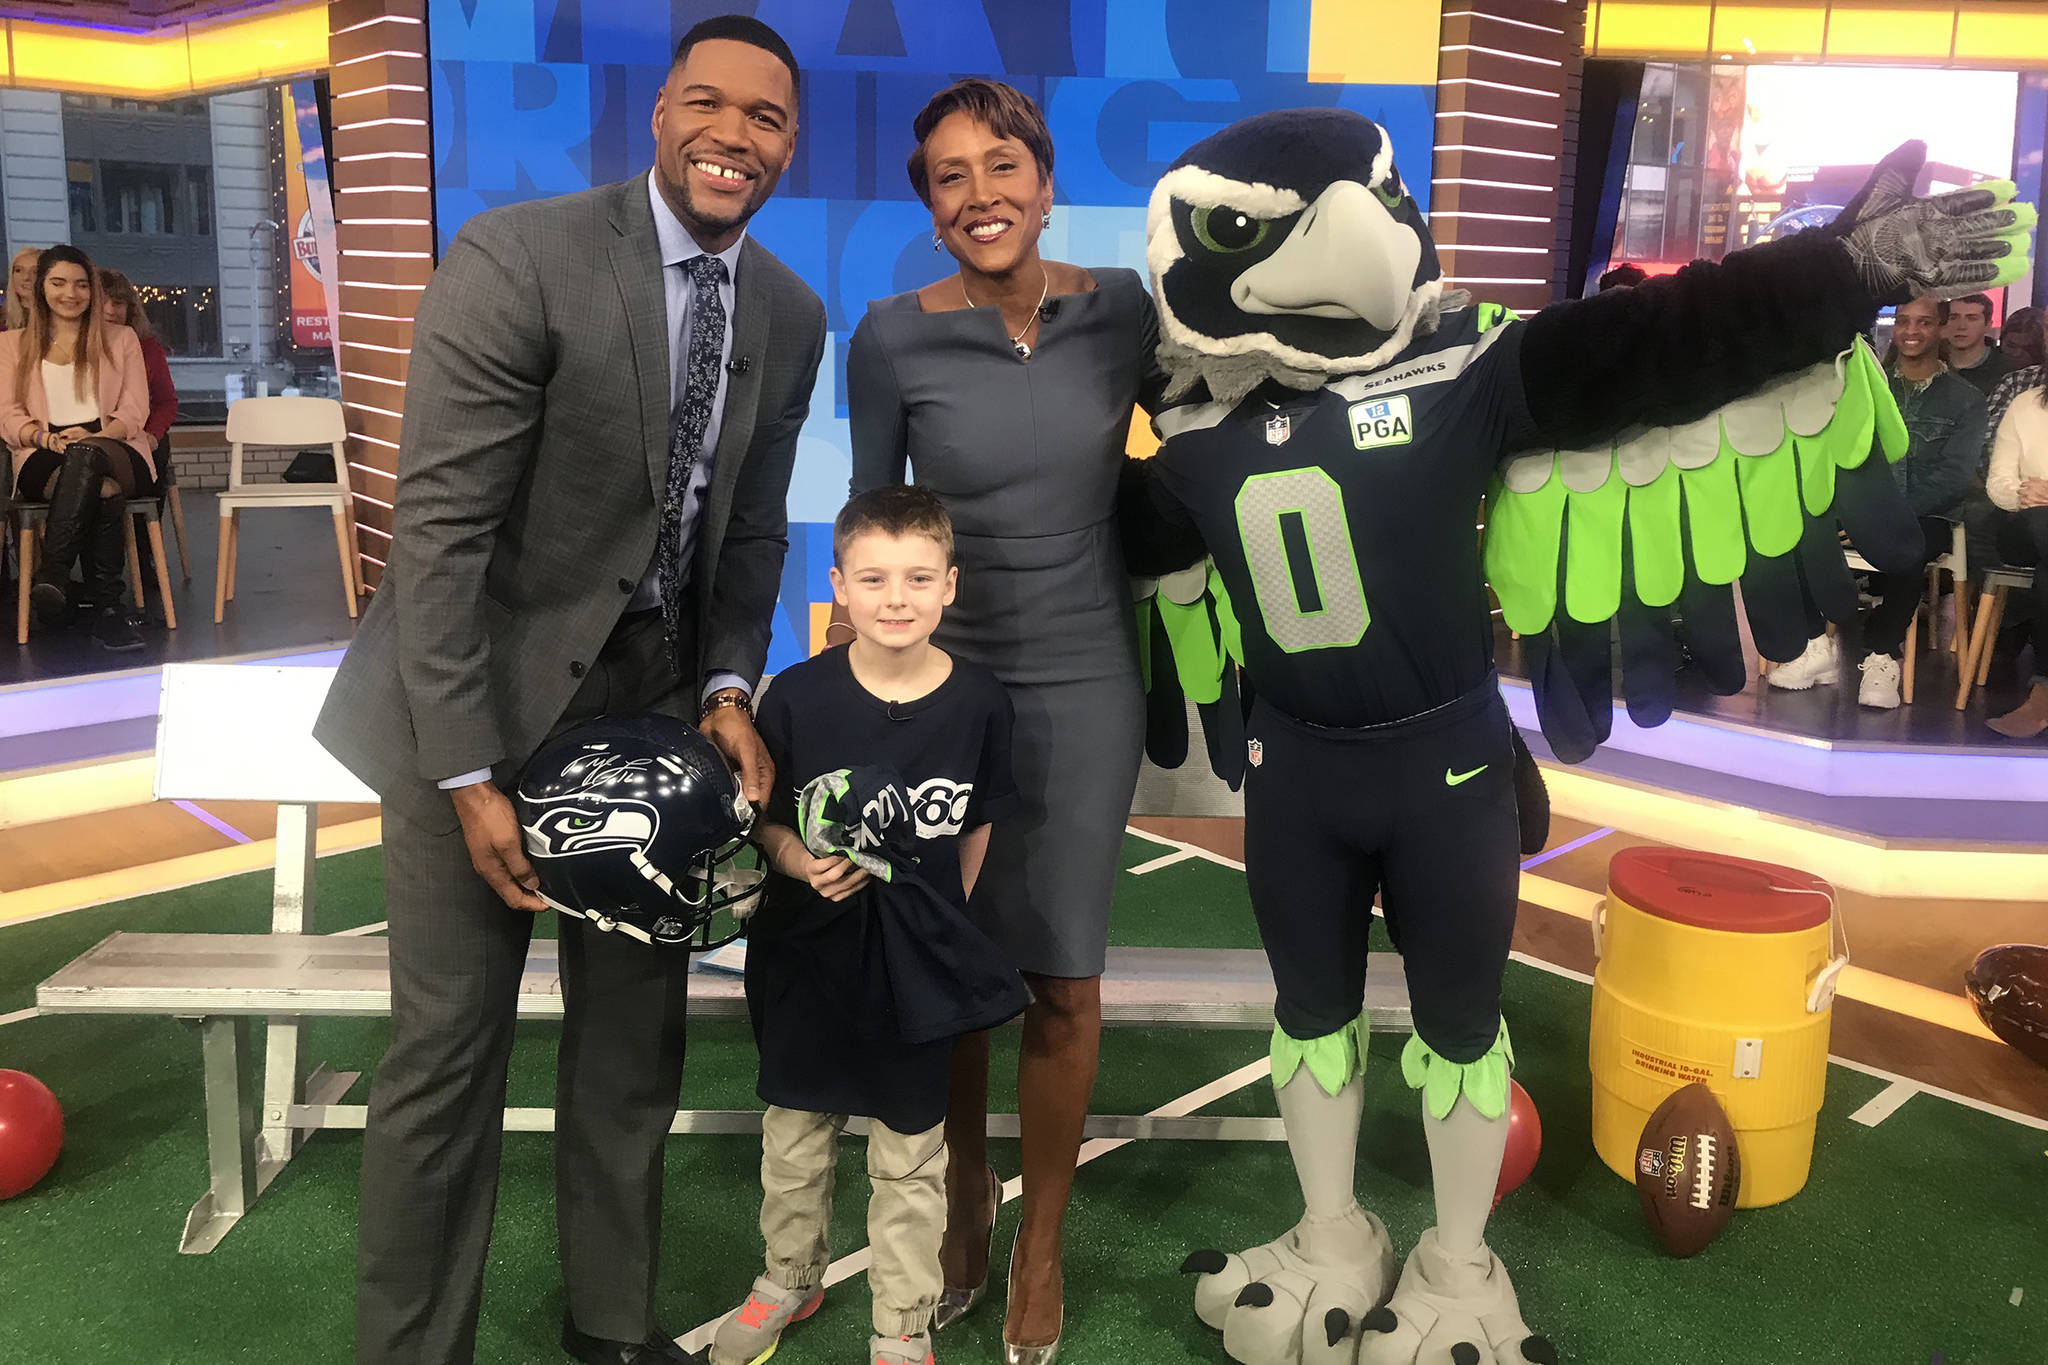 Juneau’s Camdyn Clancy, second from left, holds signed Seattle Seahawks Tyler Lockett jersey with Good Morning America hosts Michael Strahan and Robin Roberts and Seattle Seahawks mascot Blitz after a live taping of the show at New York City’s Times Square Studios on Tuesday, Jan. 17, 2019. Clancy, 8, will be receiving an all-expense paid trip to Super Bowl LII as the winner of the NFL PLAY 60 Super Kid contest. (Courtesy Photo | Hannah Clancy)